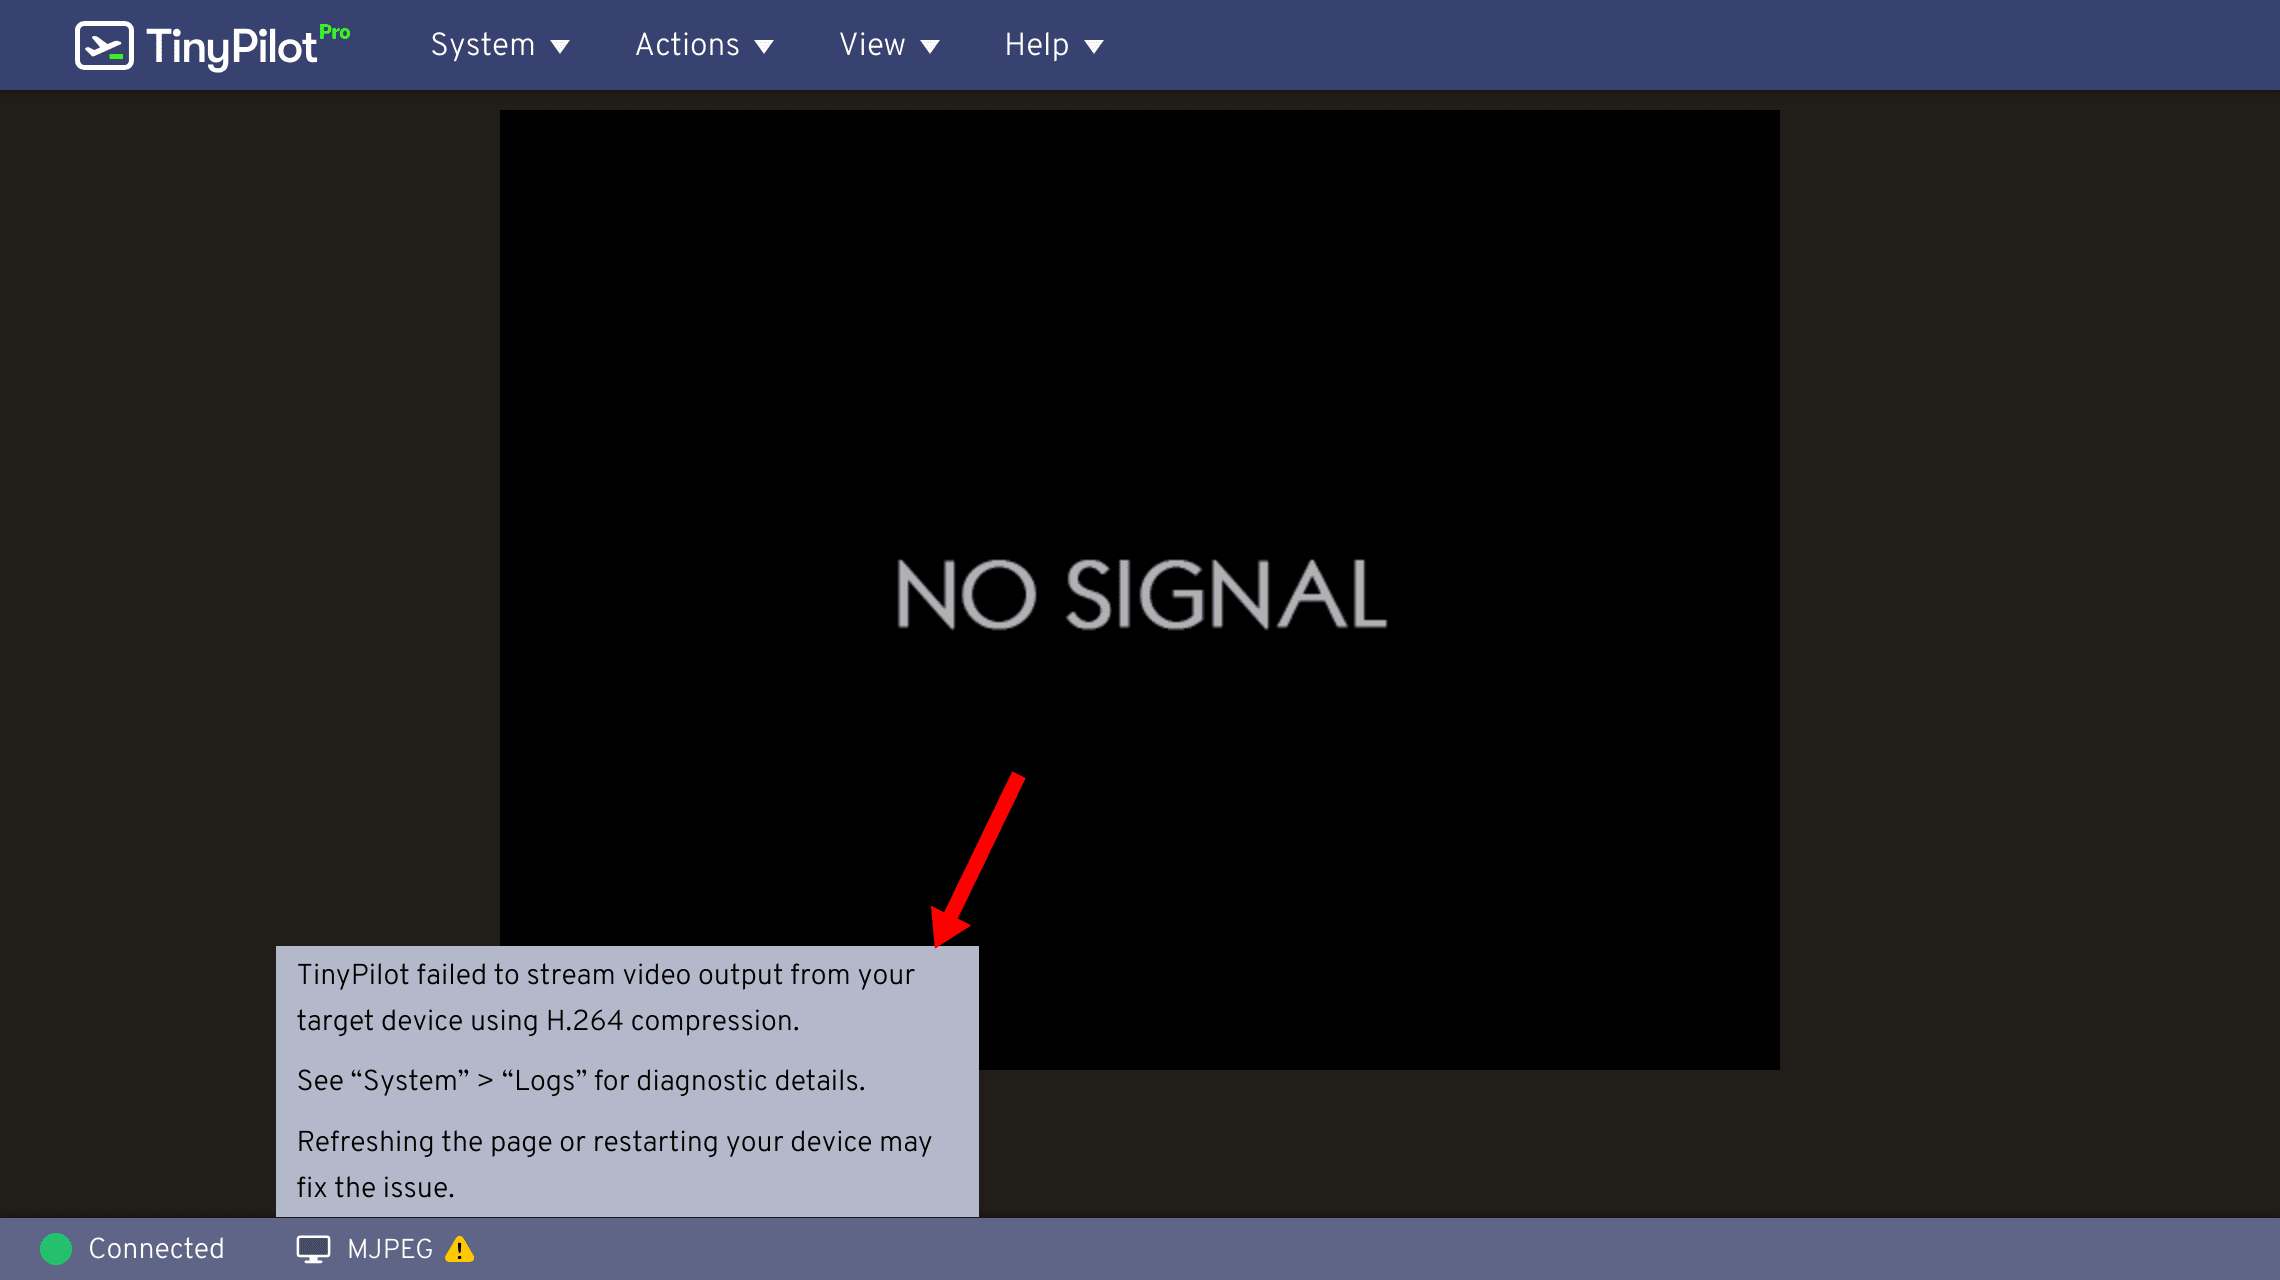 The TinyPilot web interface is open, displaying 'No Signal'. A yellow warning triangle highlights a warning that TinyPilot failed to stream video using H.264. A red arrow points to the warning information.